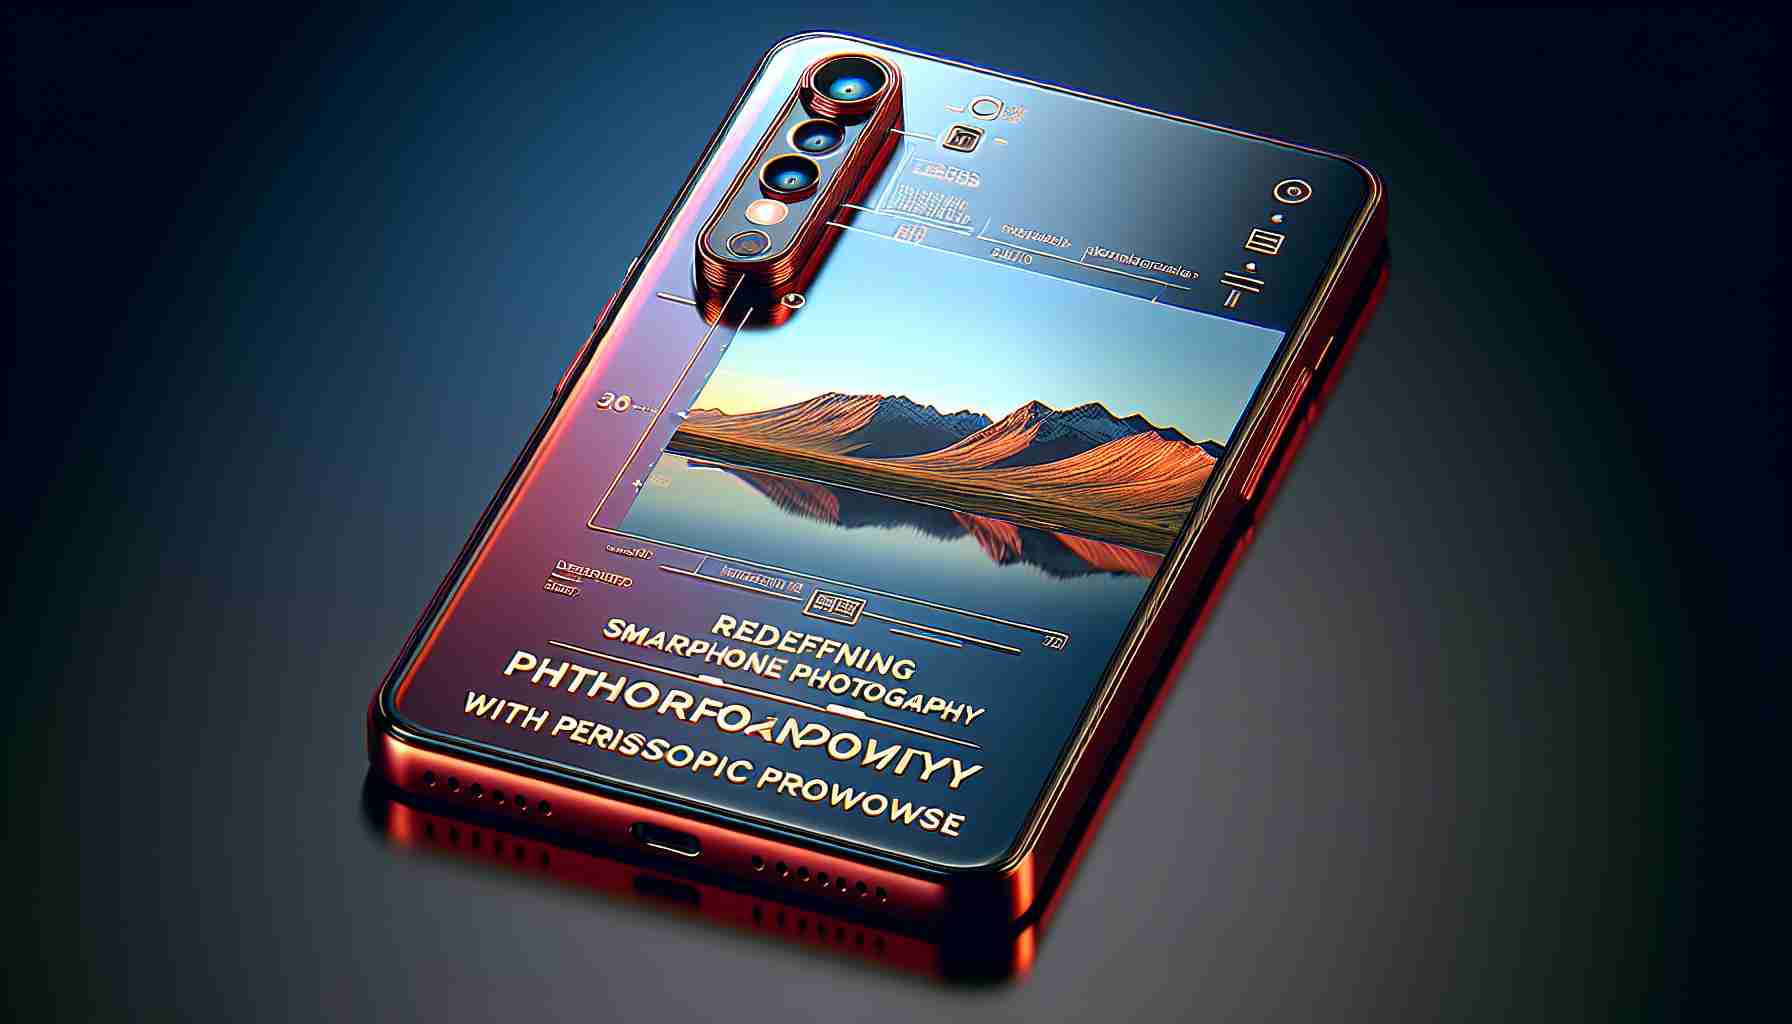 Oppo X7 Ultra: Redefining Mobile Photography